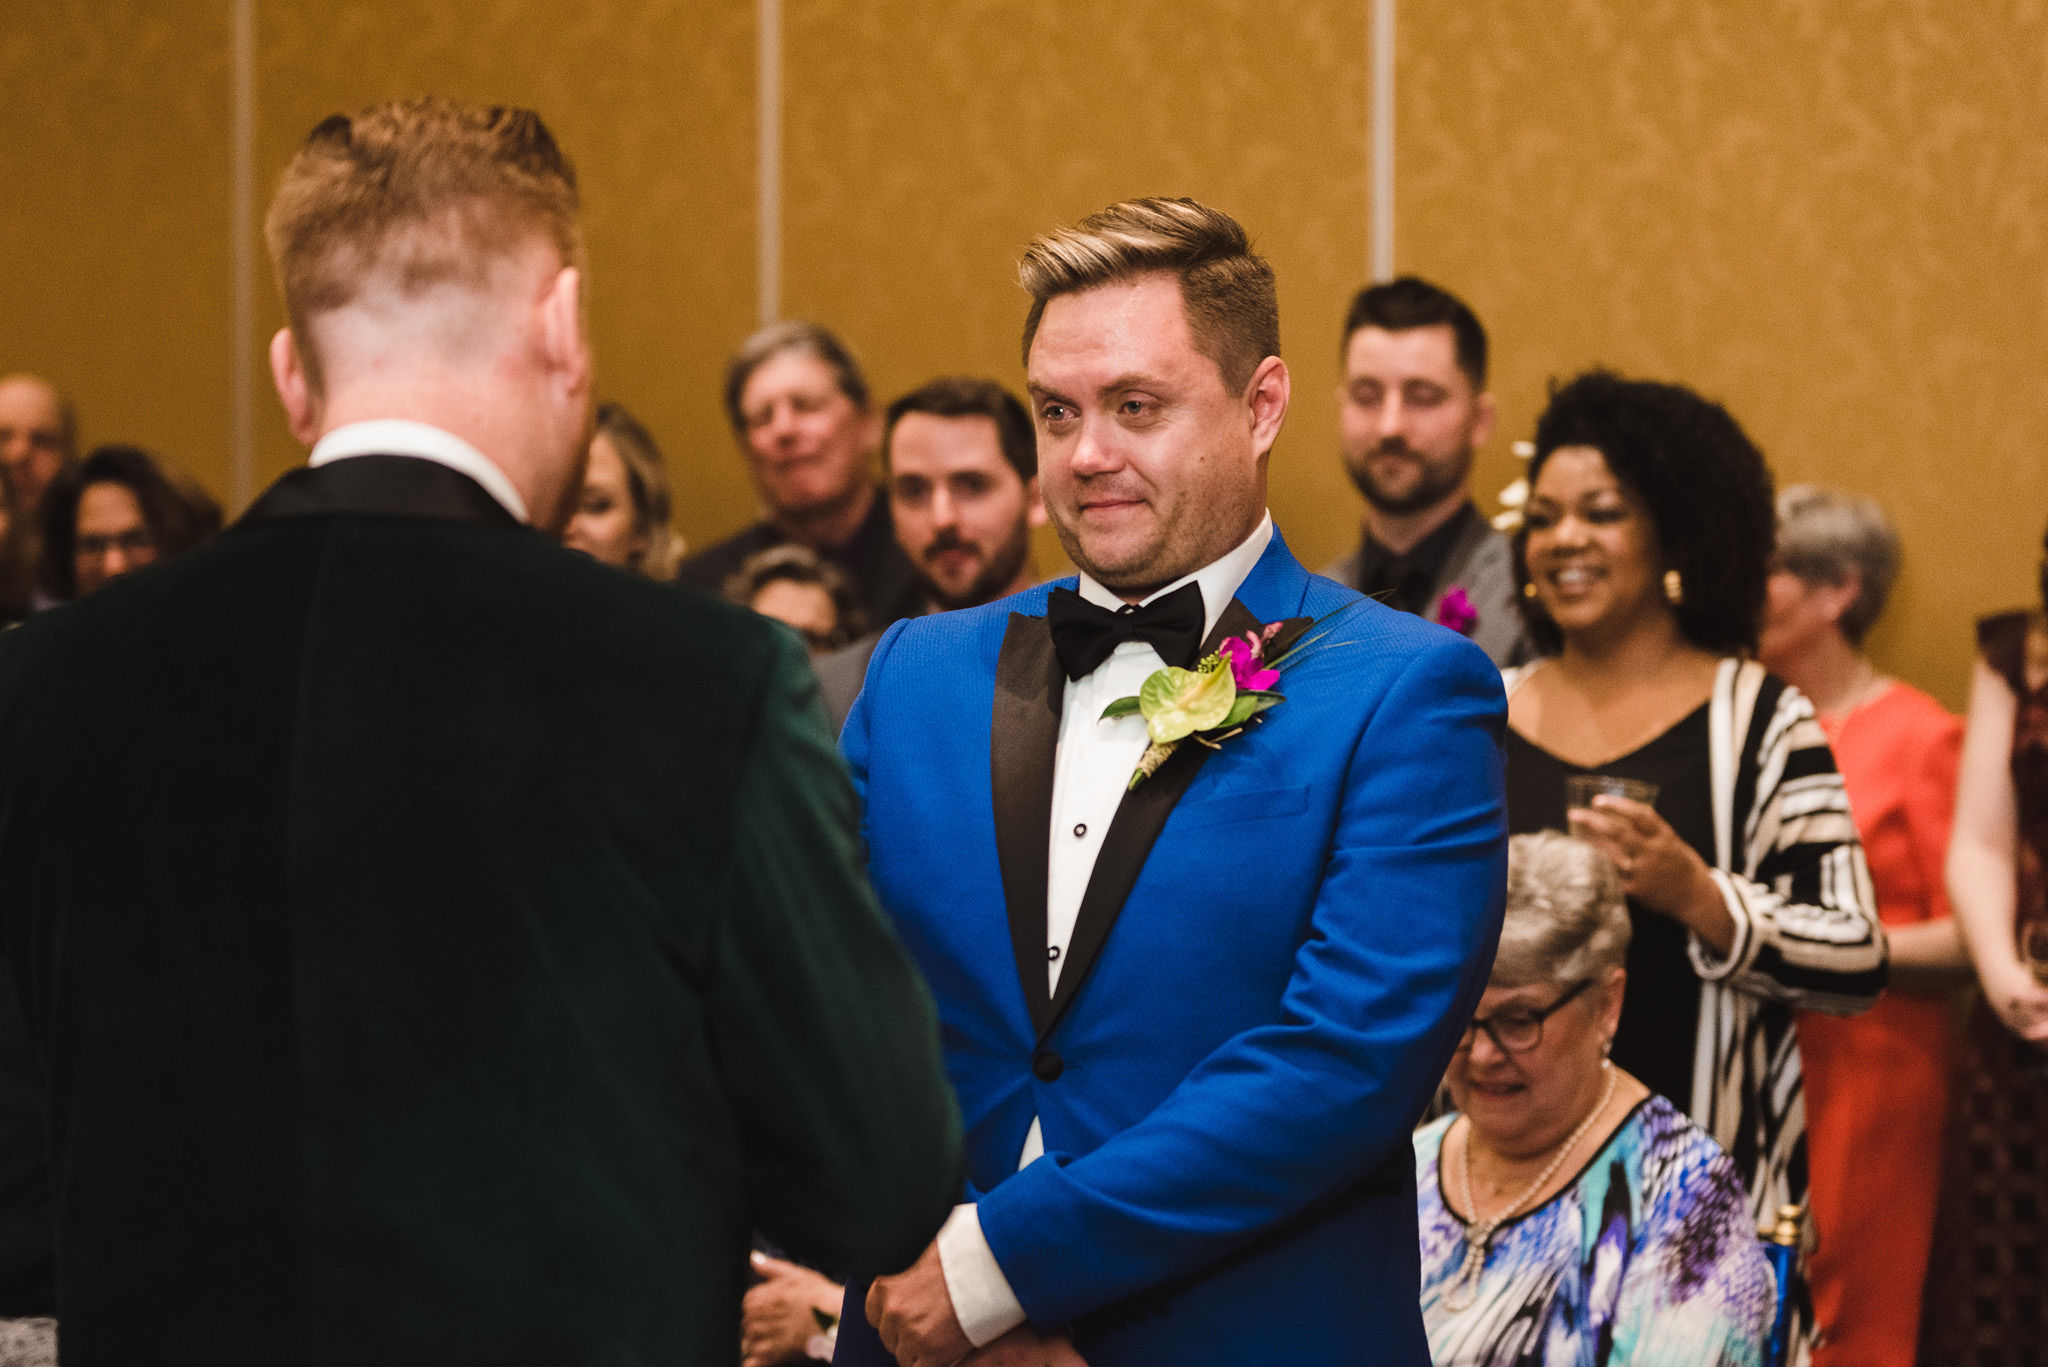 groom in bright blue suit getting teary eyed during wedding ceremony at the Hilton Fallsview in Niagara Falls